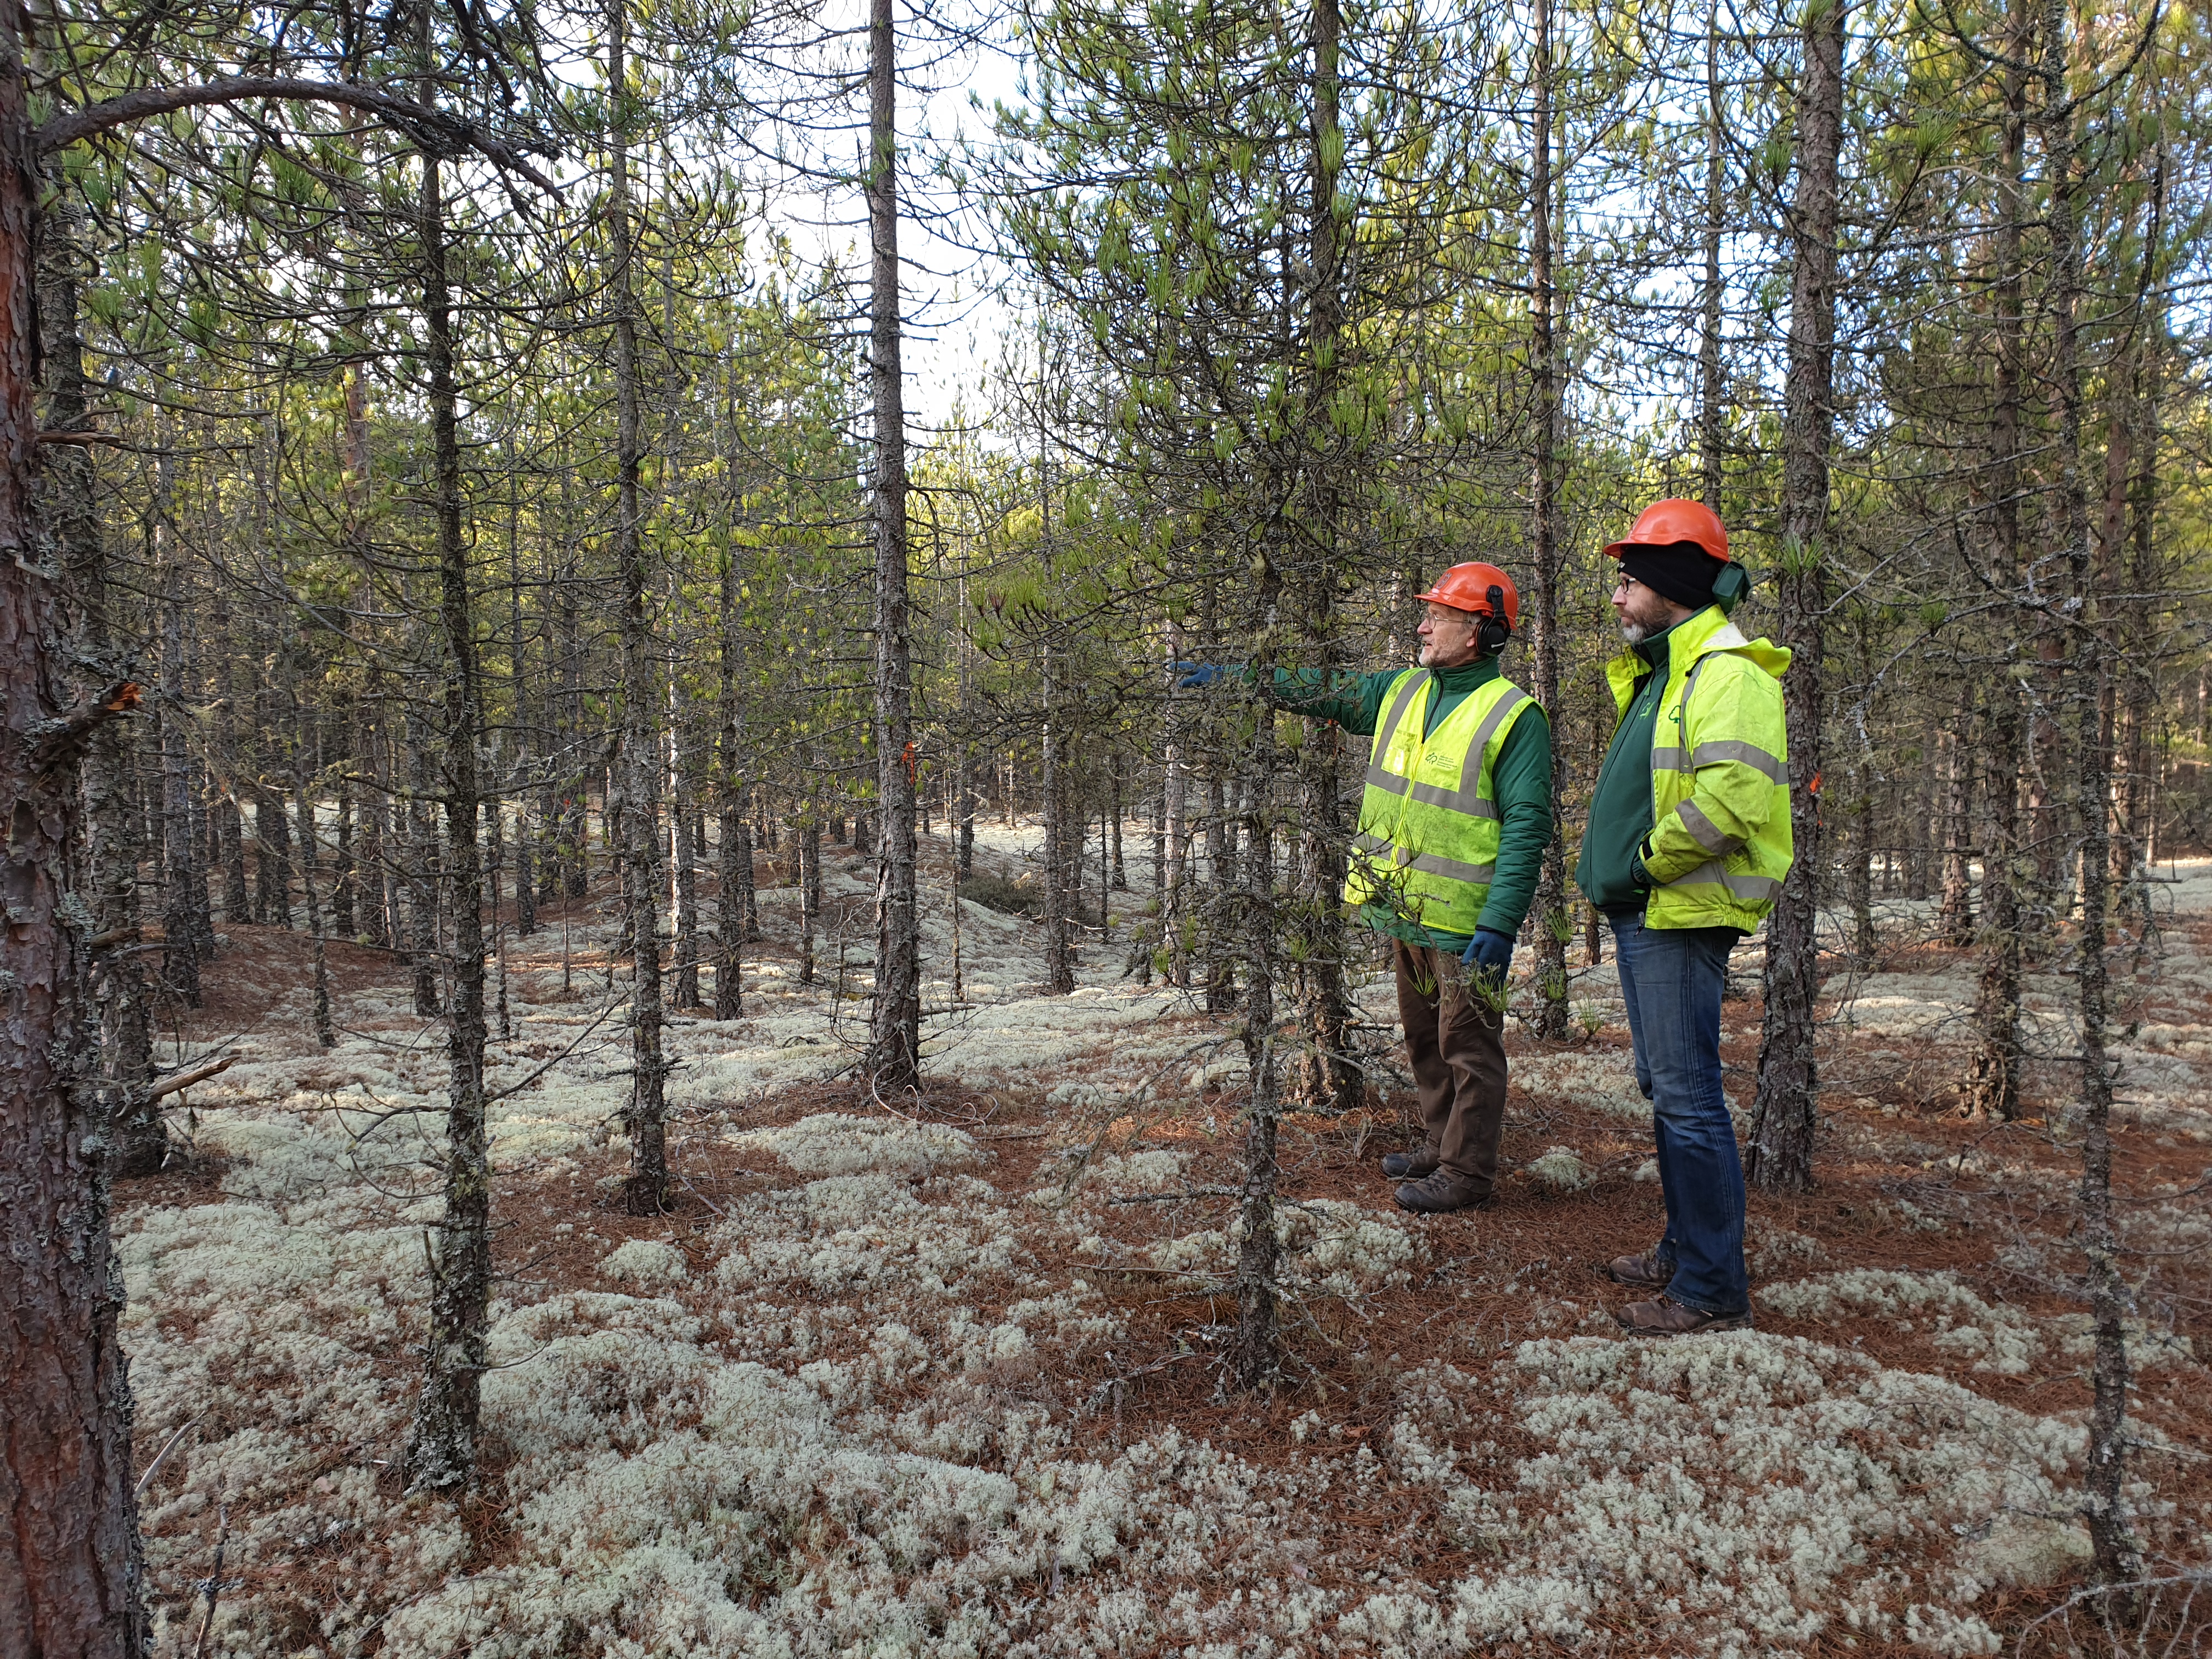 Two forestry workers in safety gear stand in a lichen forest, one points to the distance